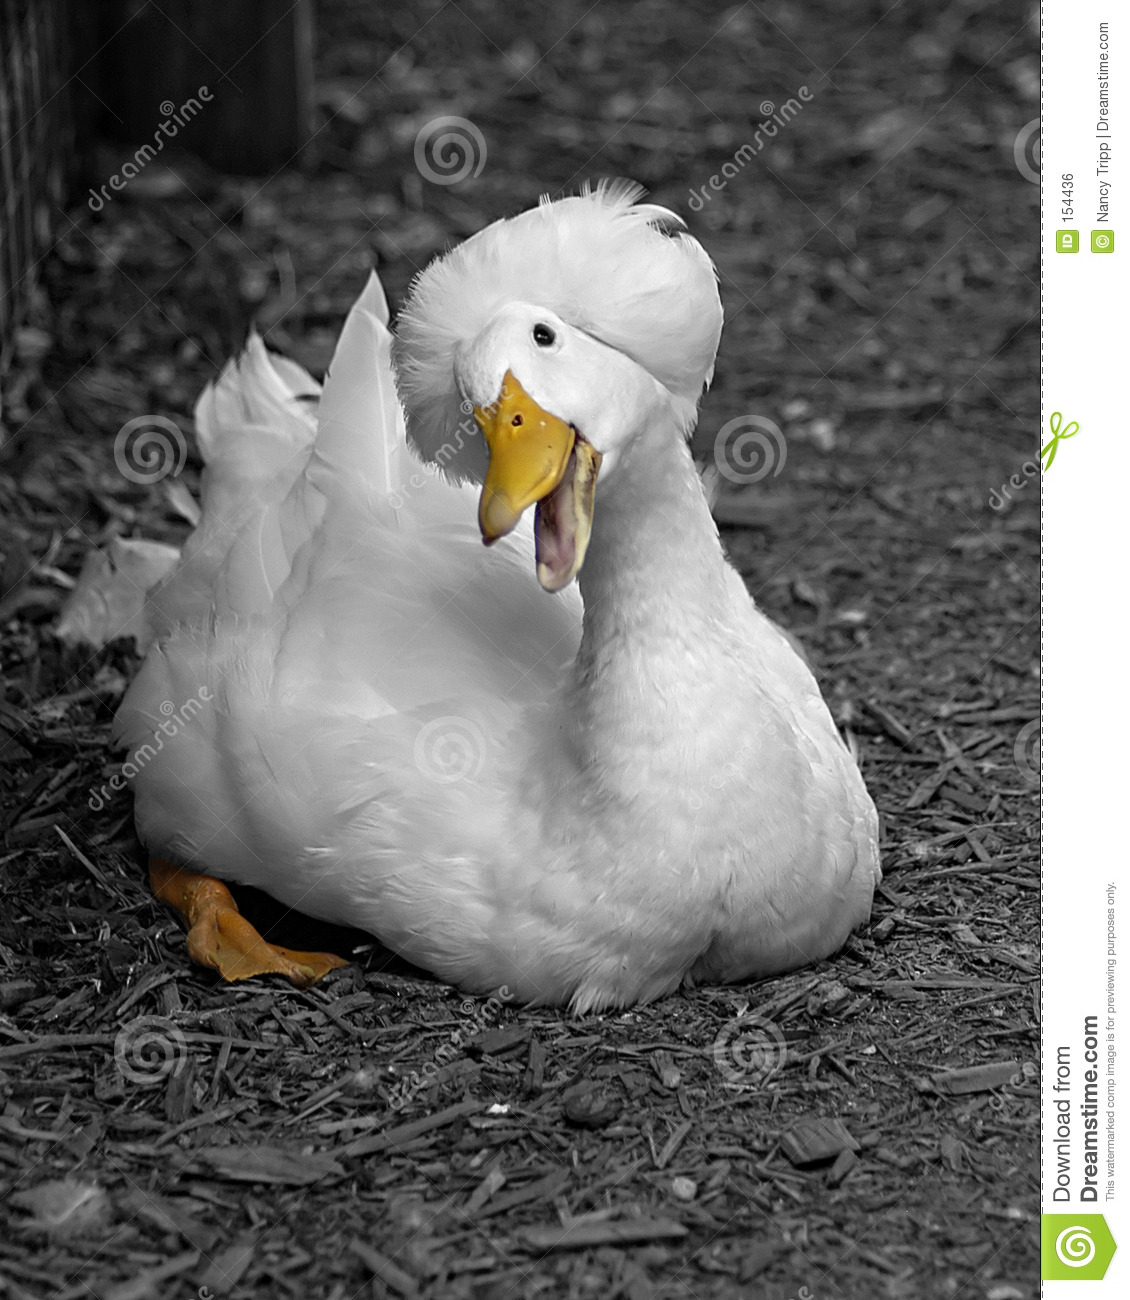 Funny Duck Smiling Face Image